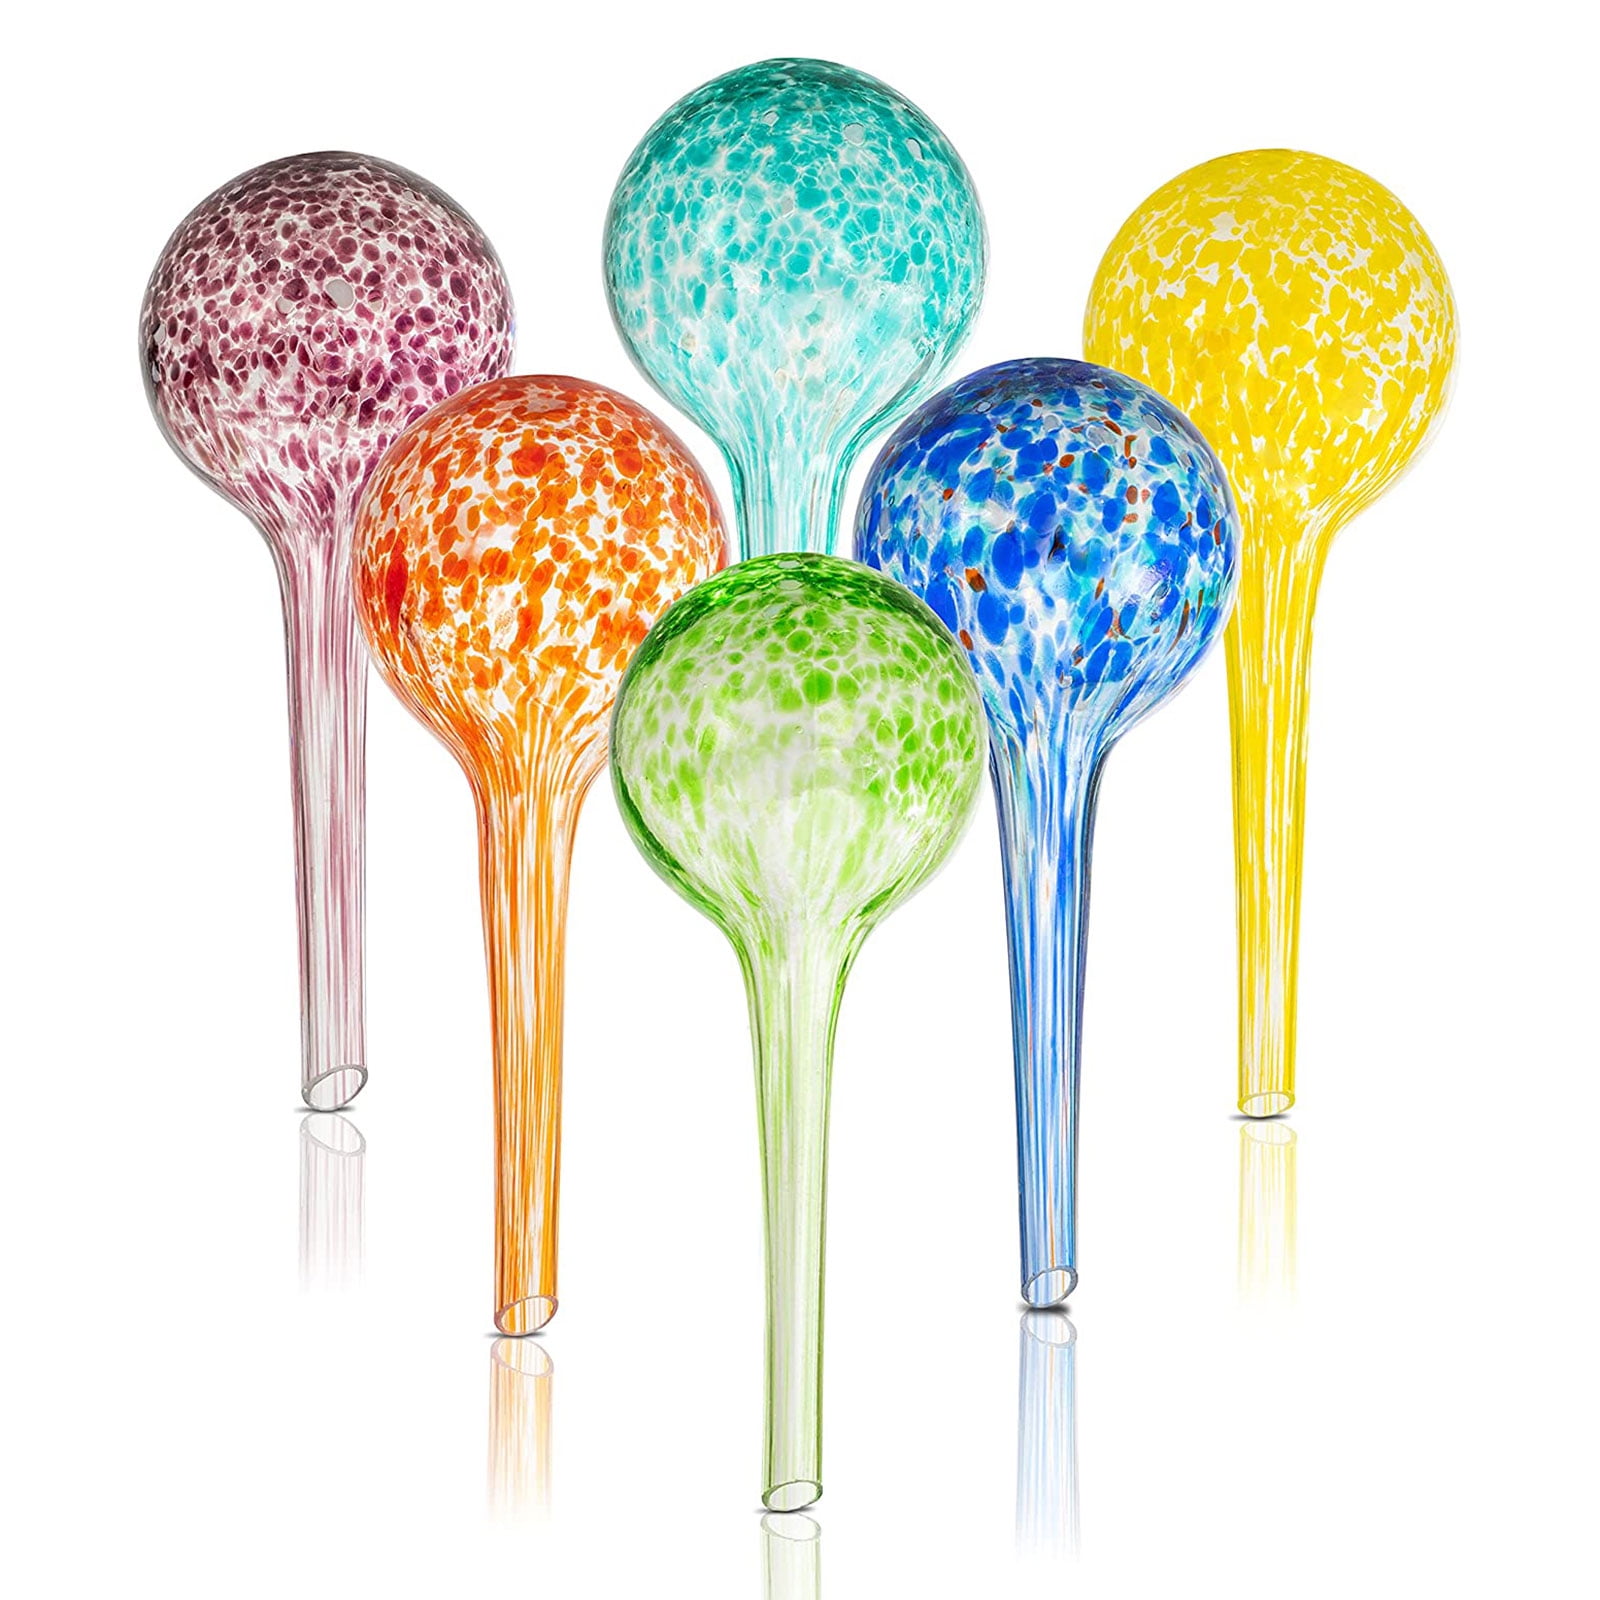 Multi-Color, One Size LANTIAN Small Watering Globe Set 6 Piece Colorful Hand-Blown Glass Garden Watering System 